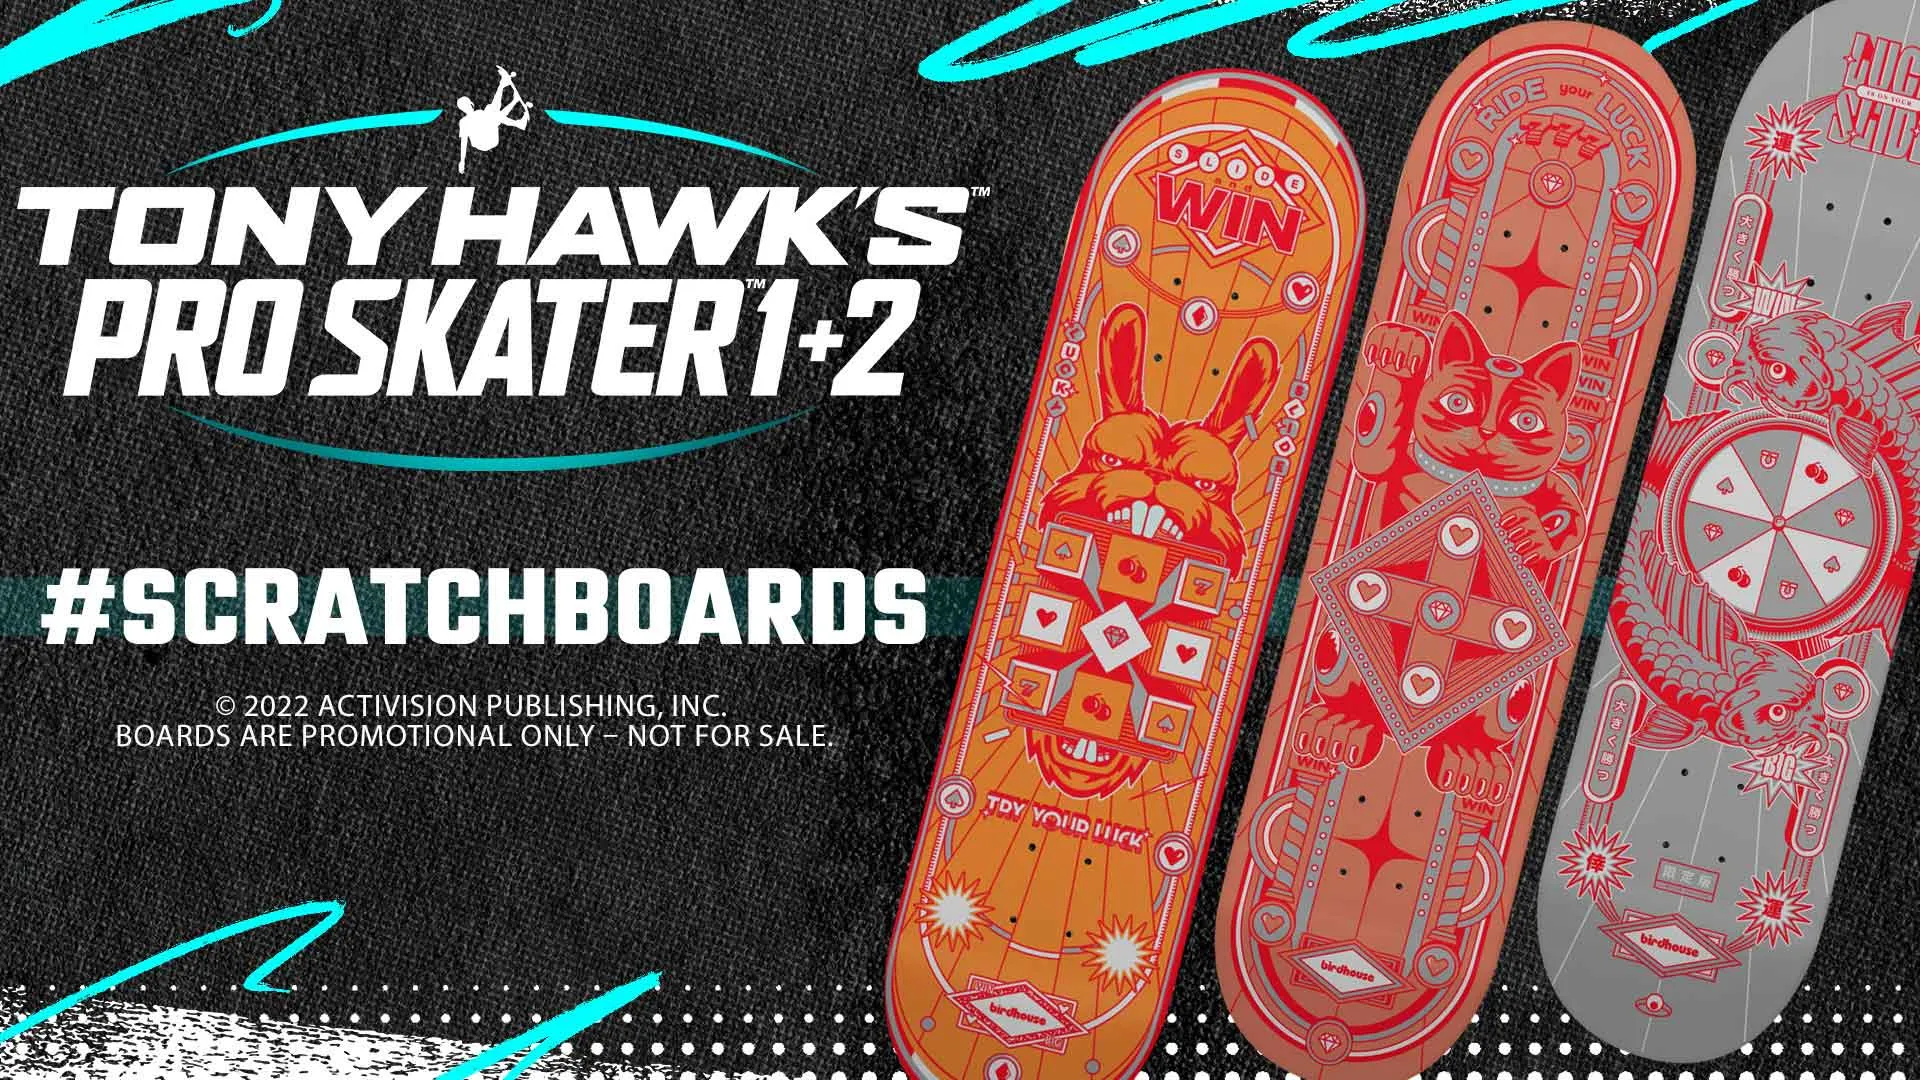 Tony Hawk's Pro Skater 1 and 2 skateboard sweepstakes announced